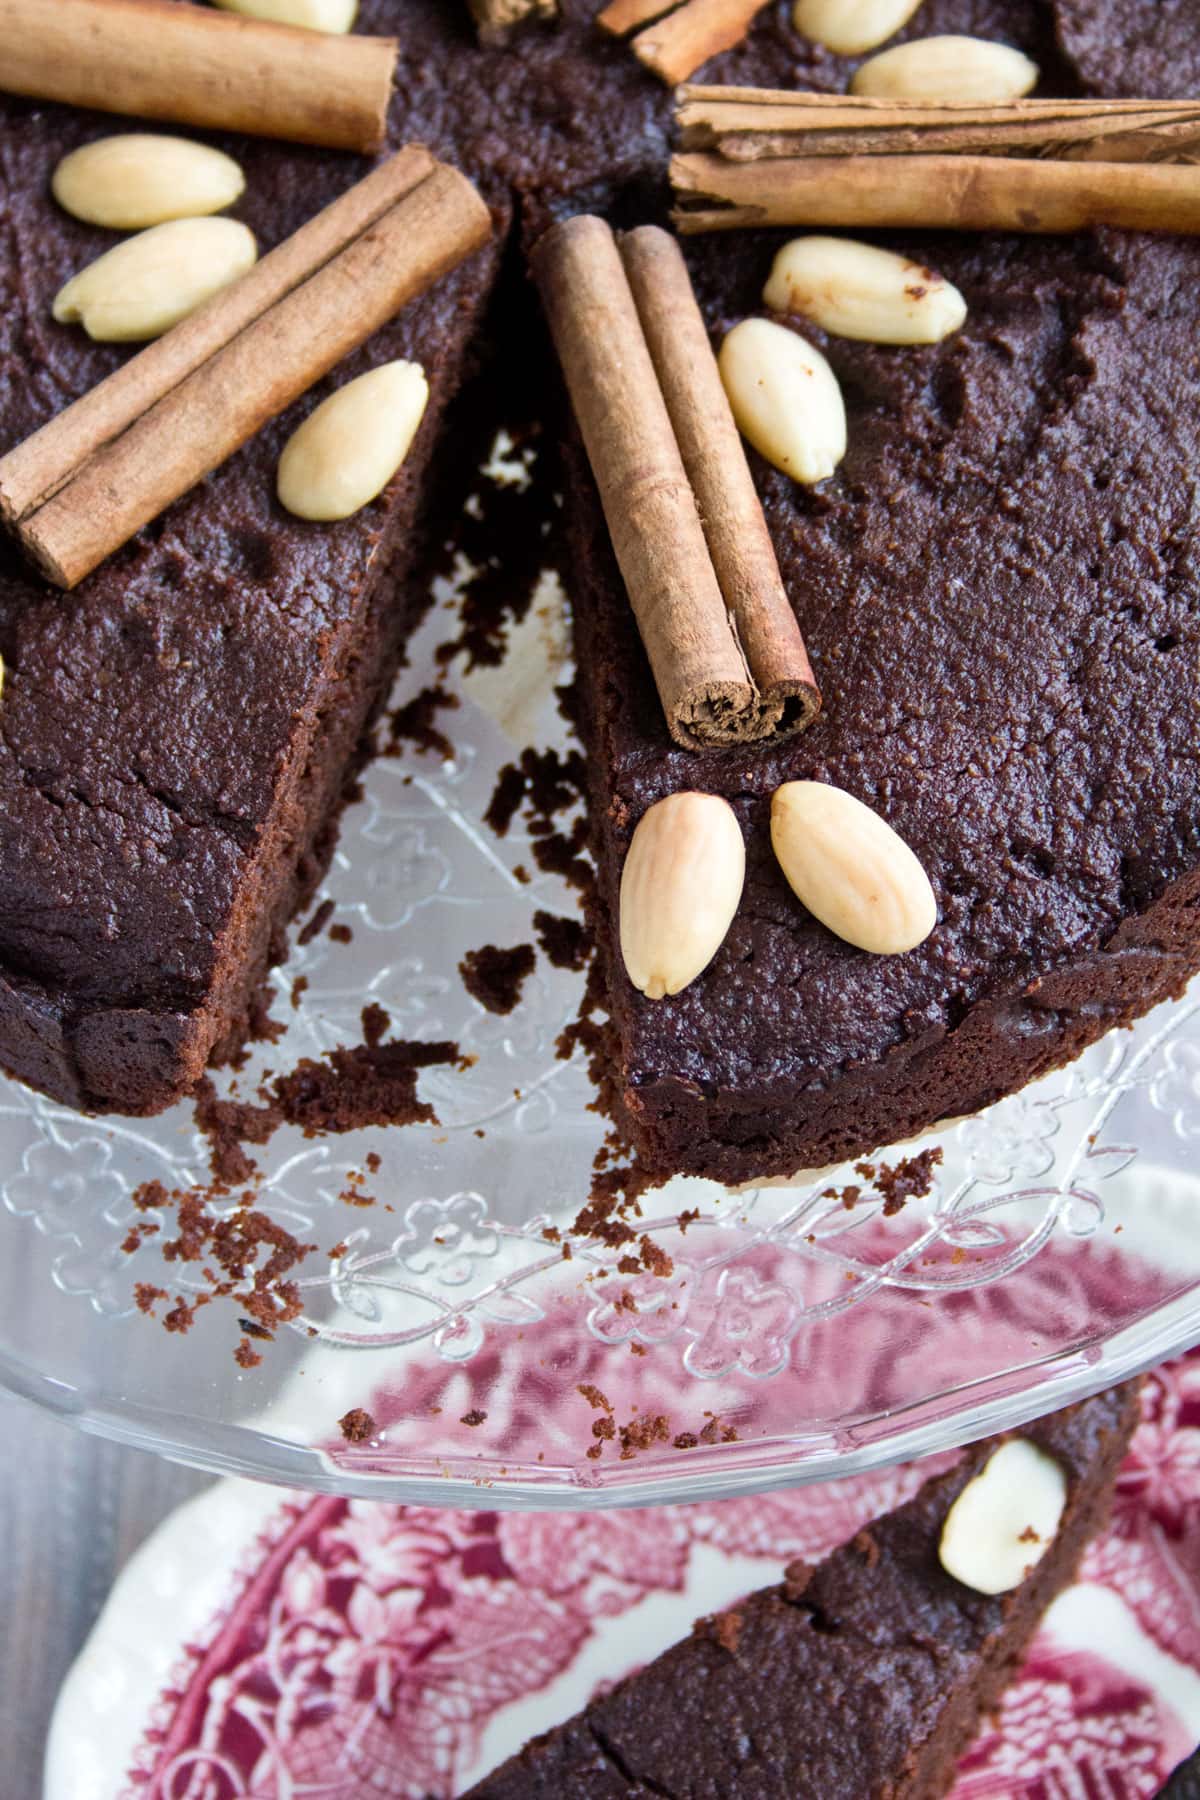 A chocolate cake decorated with cinnamon sticks and almonds on a cake stand.